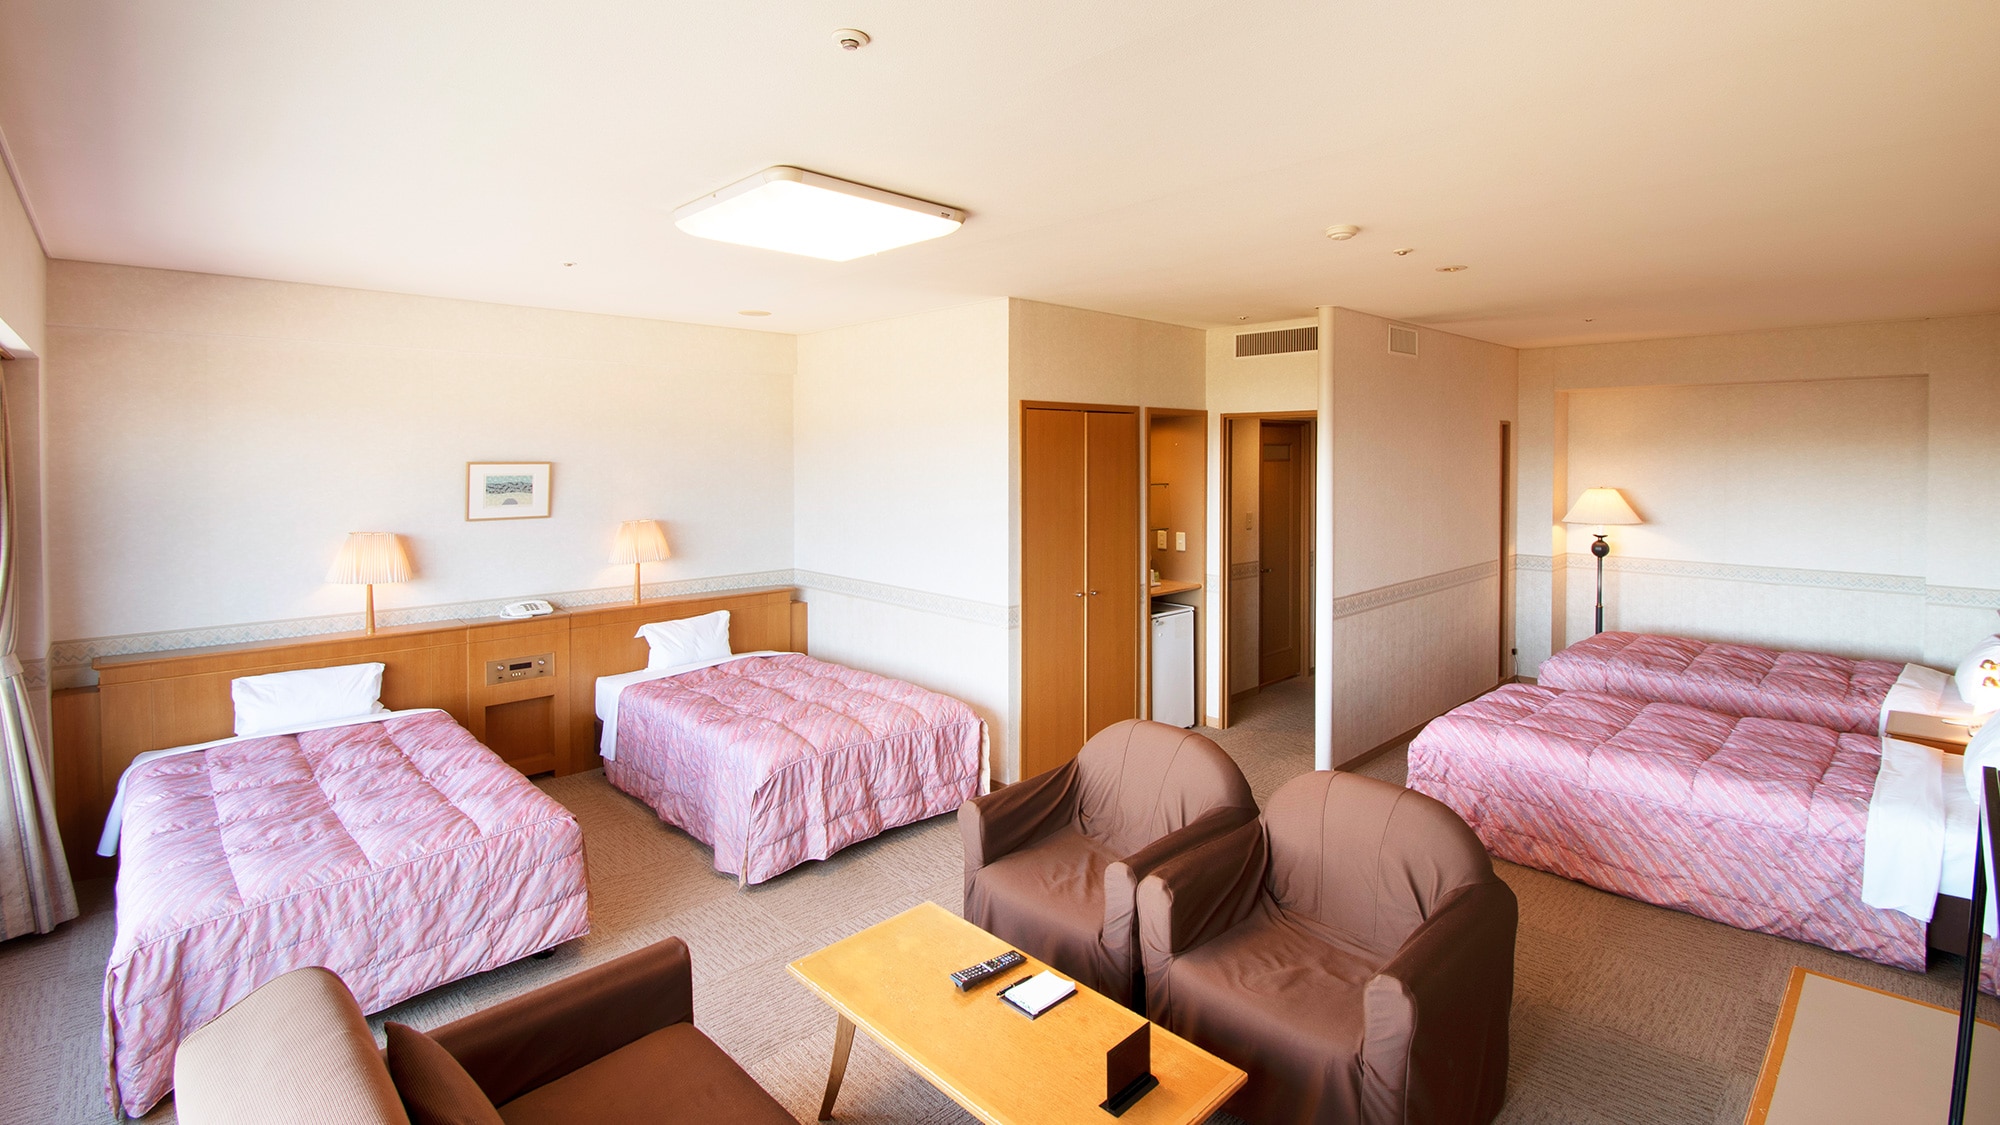 ◆ Deluxe Room [North Wing] 52.3 square meters